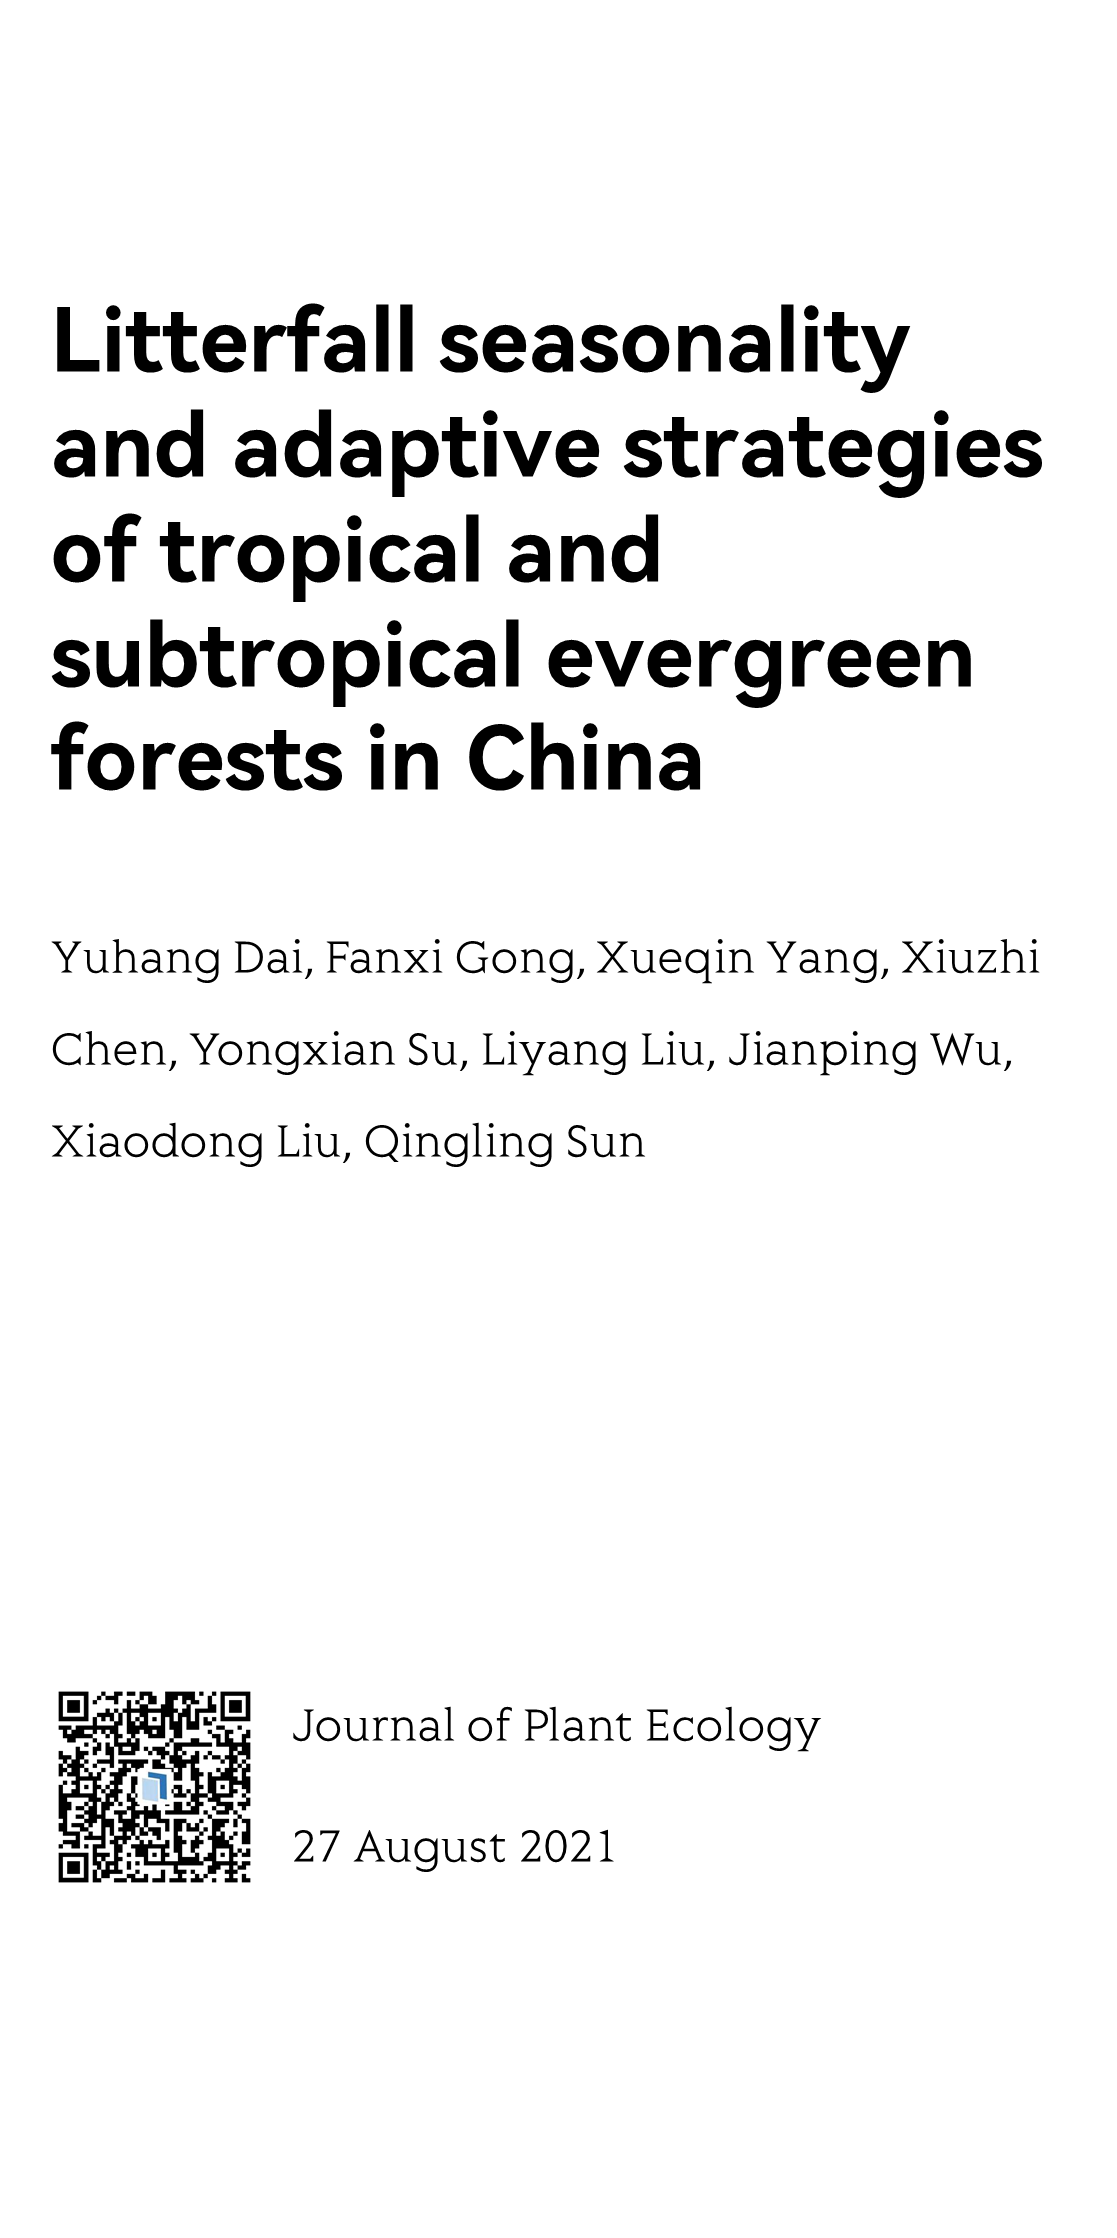 Litterfall seasonality and adaptive strategies of tropical and subtropical evergreen forests in China_1